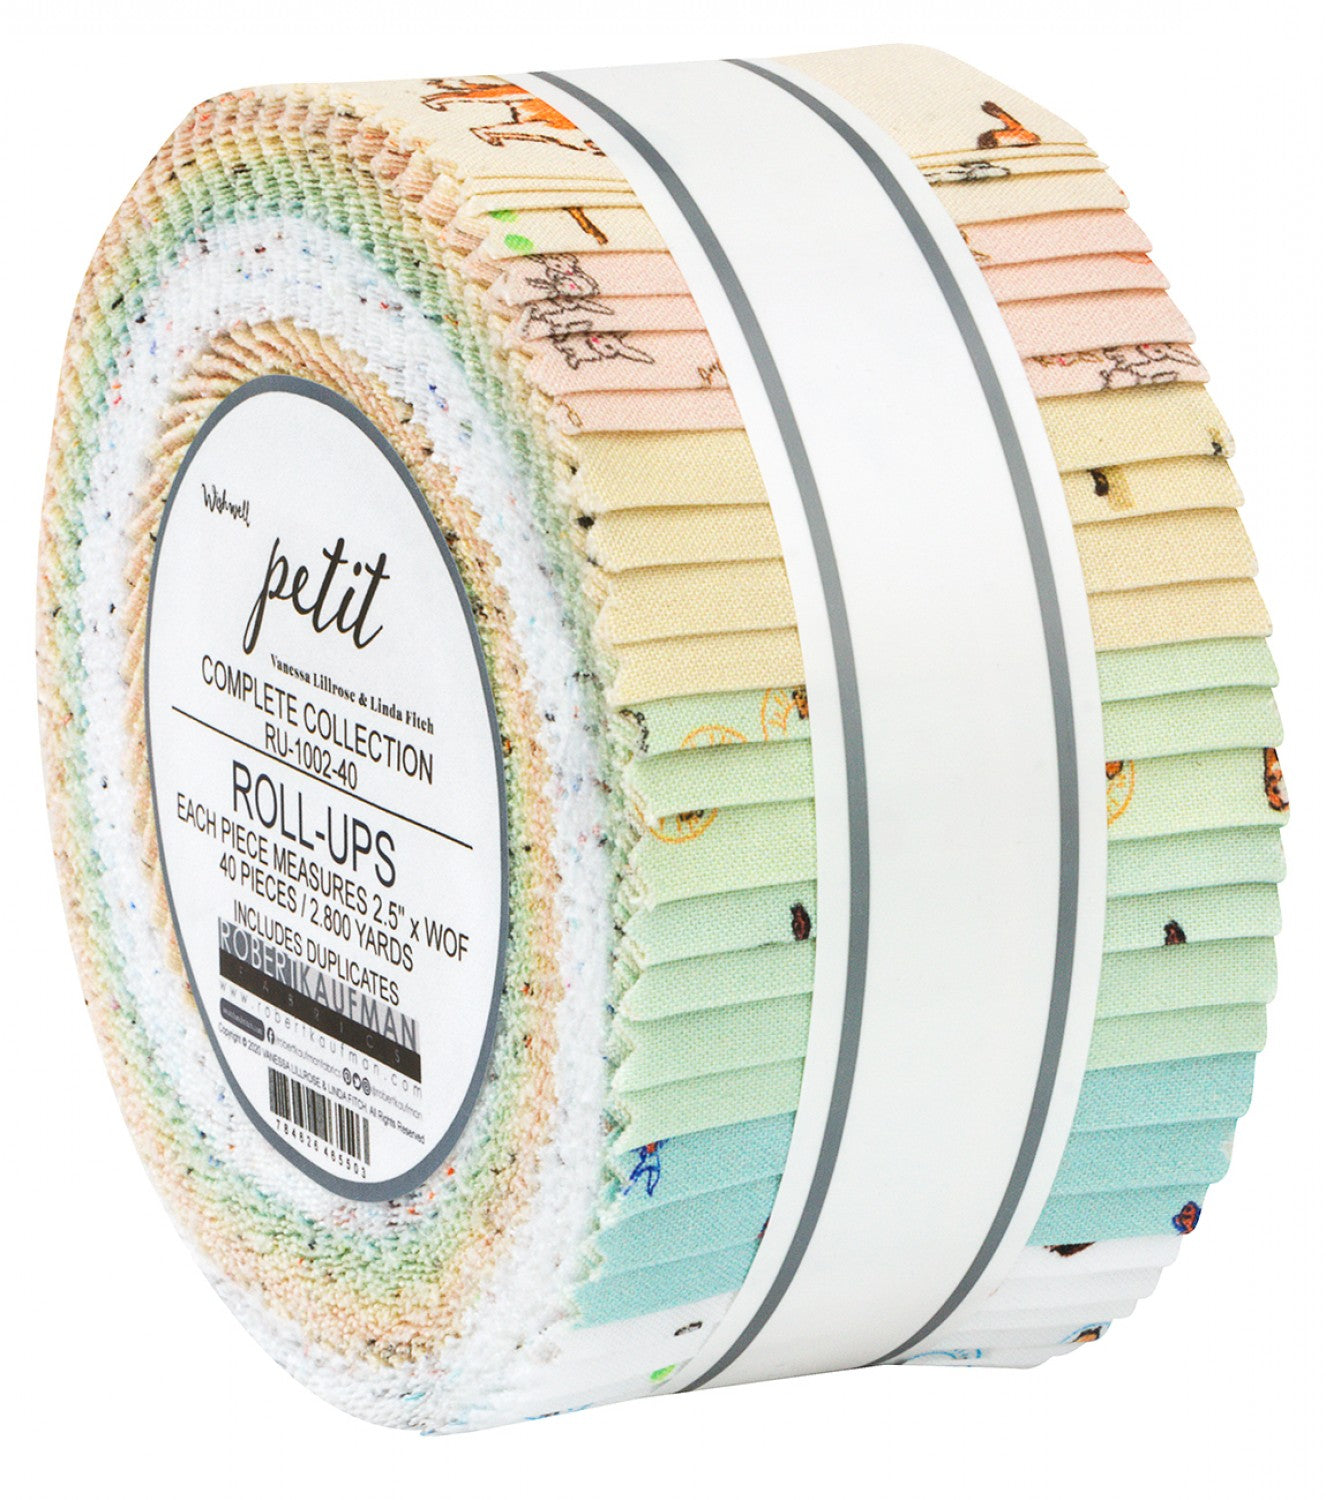 S 2.5" Strips - Petit Roll-Up Complete Collection by Robert Kaufman